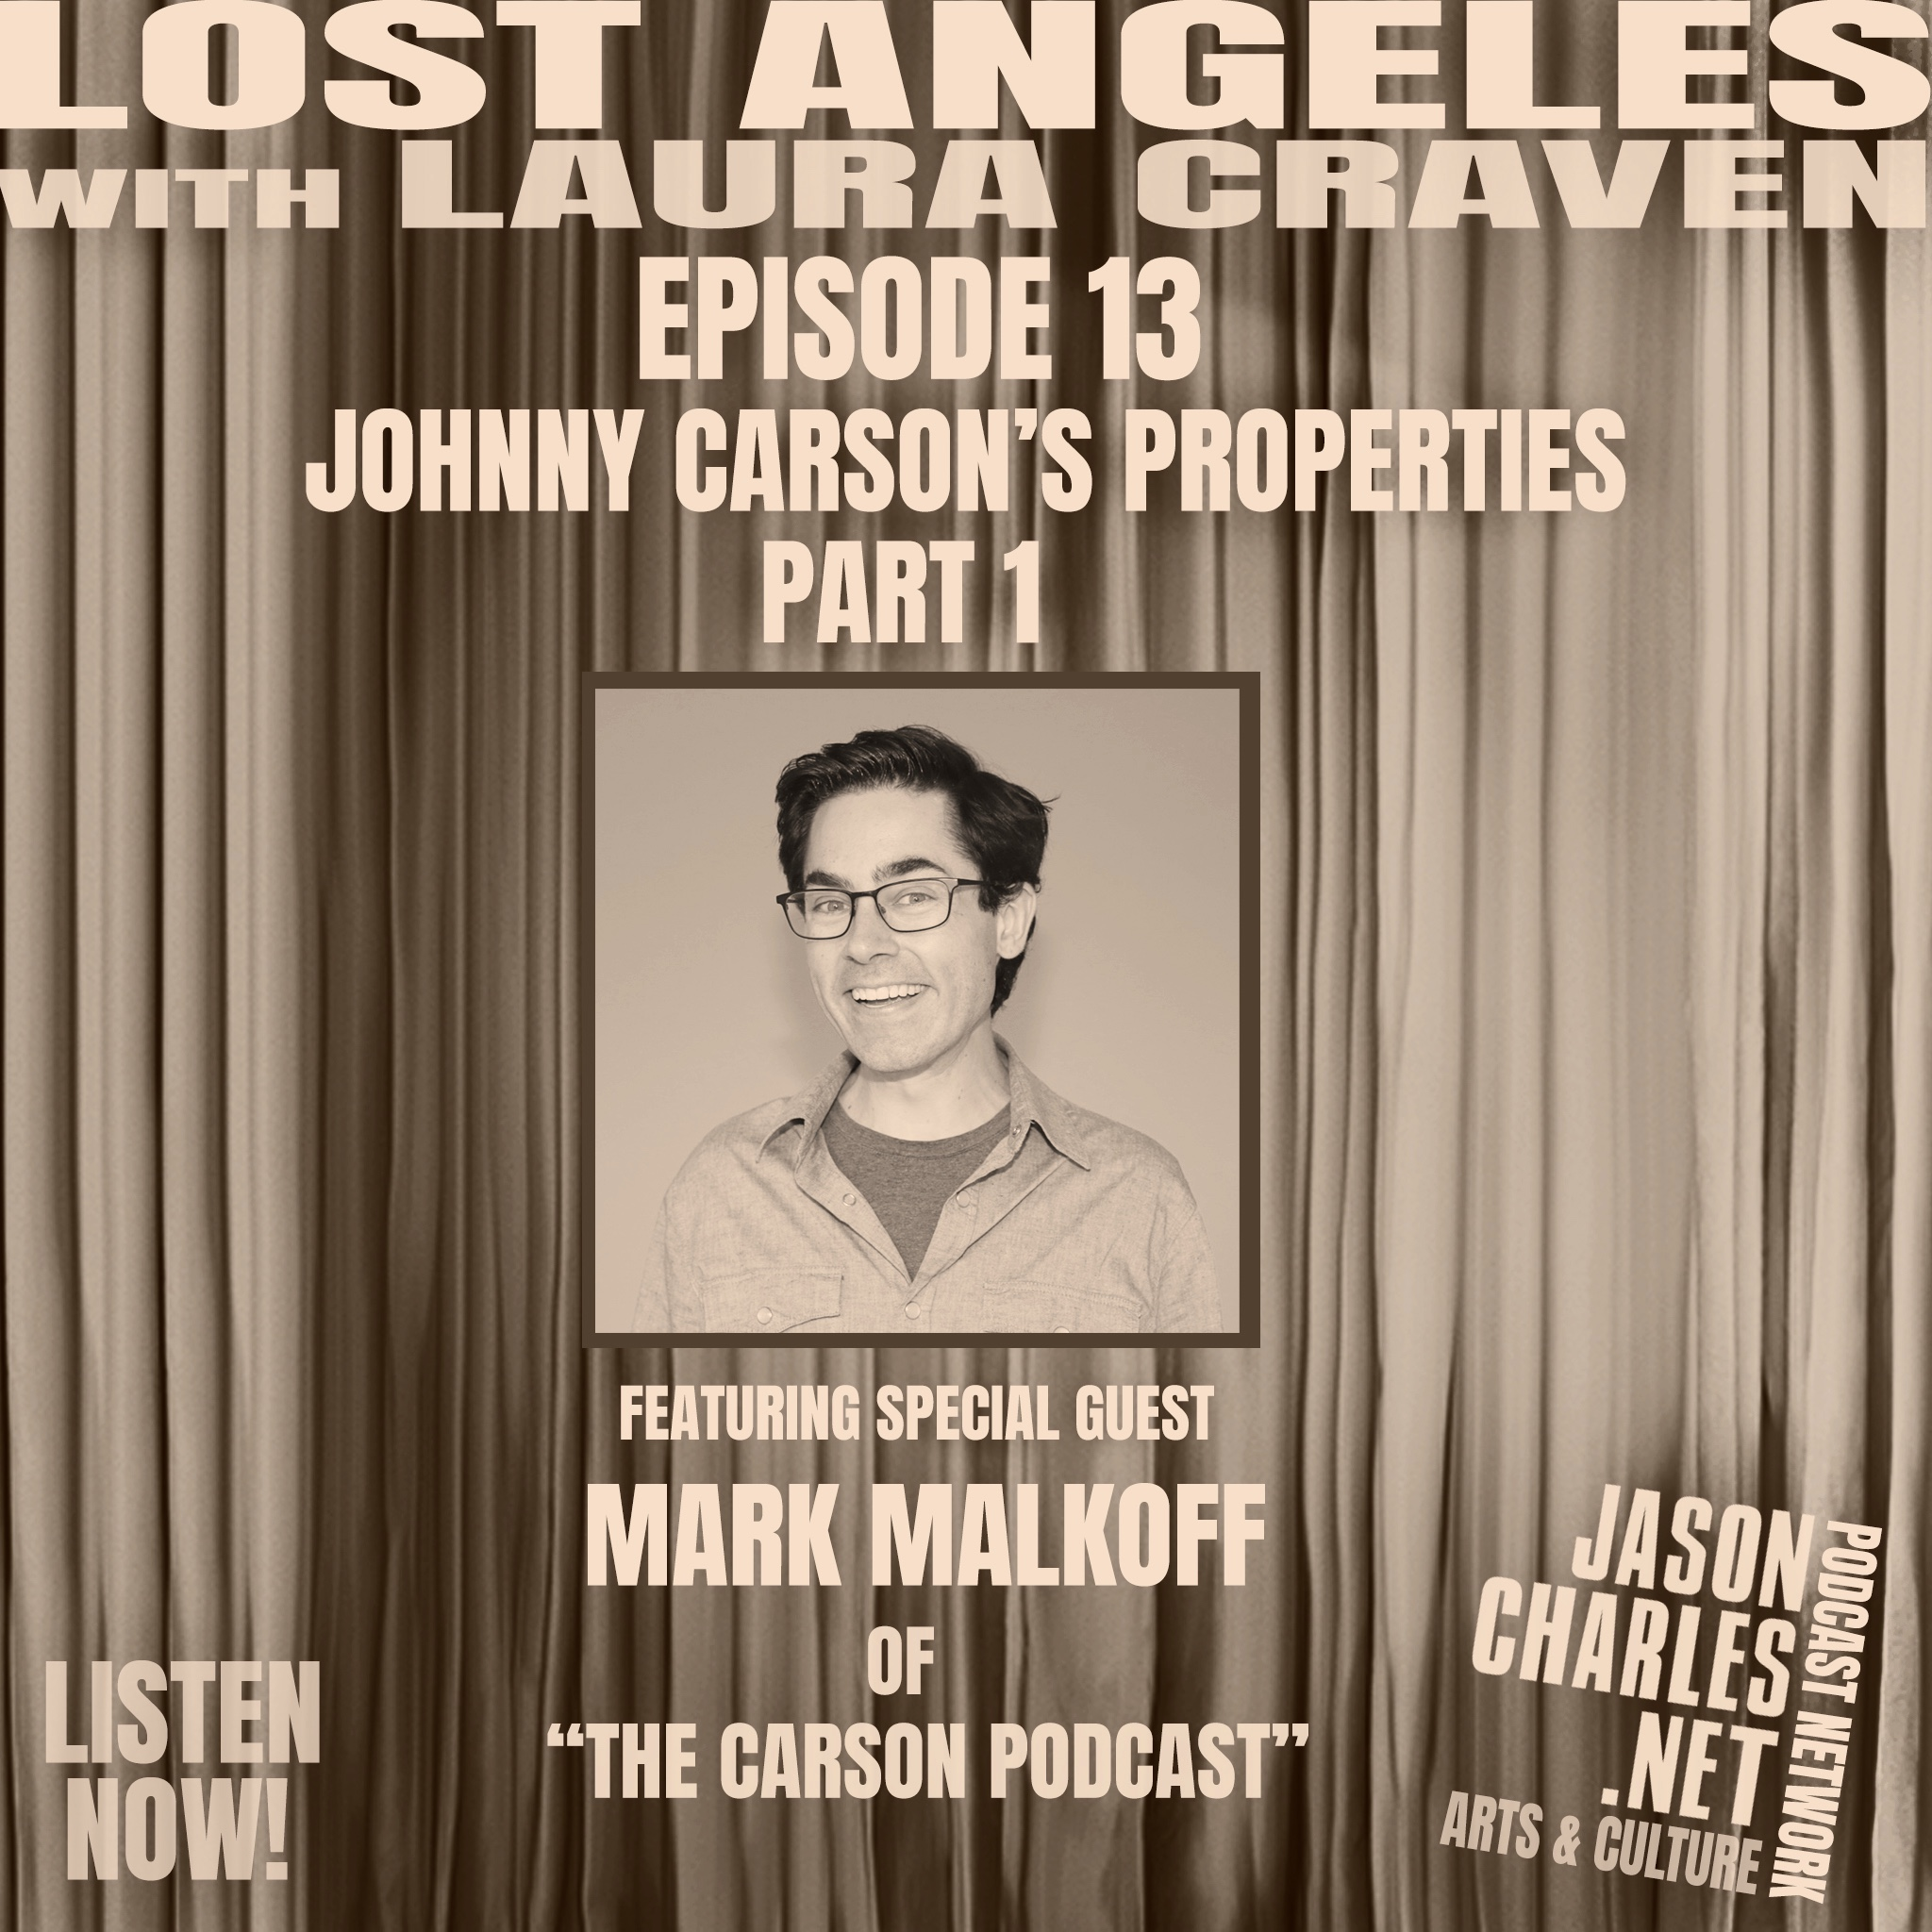 LOST ANGELES Episode 13 JOHNNY CARSON'S PROPERTIES Part 1 with Guest MARK MALKOFF